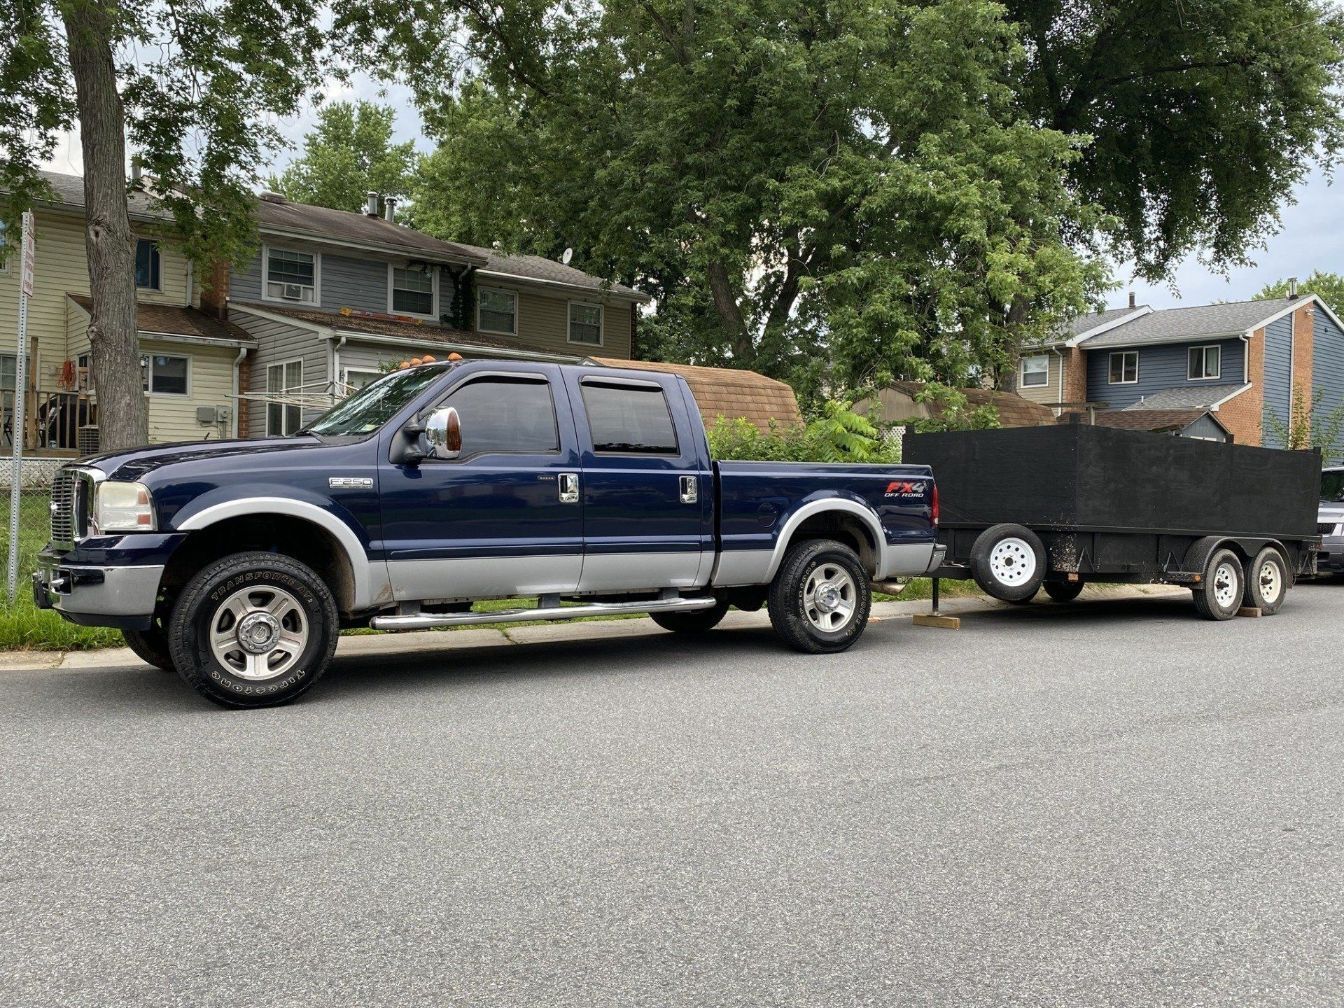 Pyle Hauling Junk Removal Truck with Large Dump Trailer